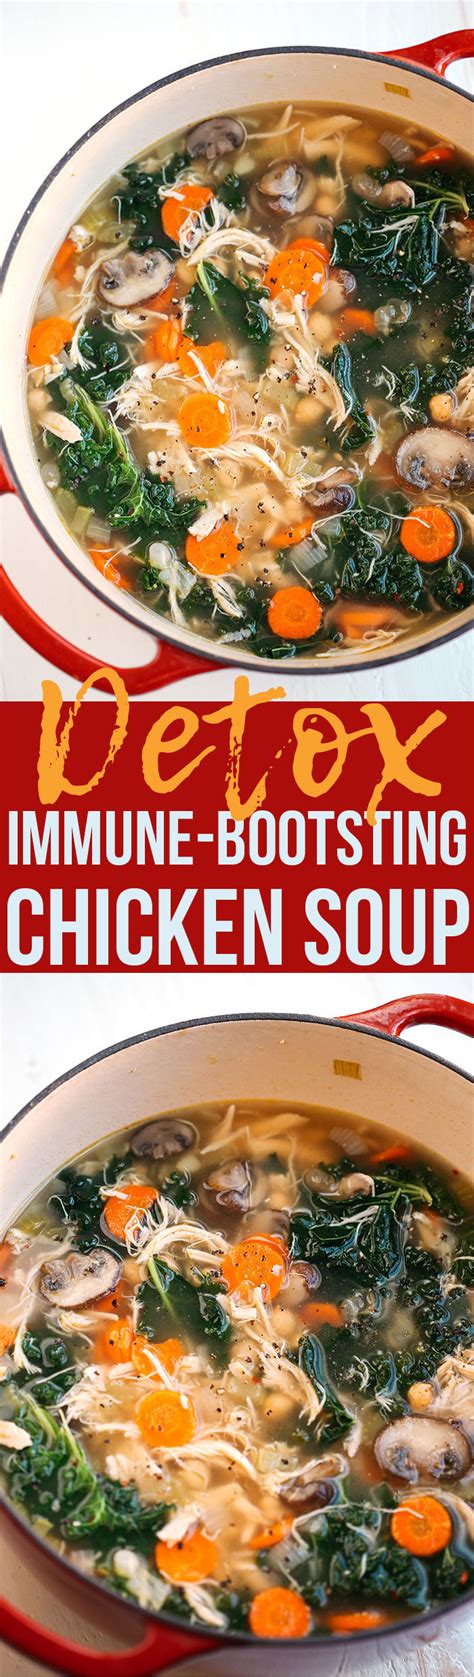 I've included a wide variety of vegetables in this soup recipe to help you get a good quantity of nutrients in your day! Detox Immune-Boosting Chicken Soup - Eat Yourself Skinny